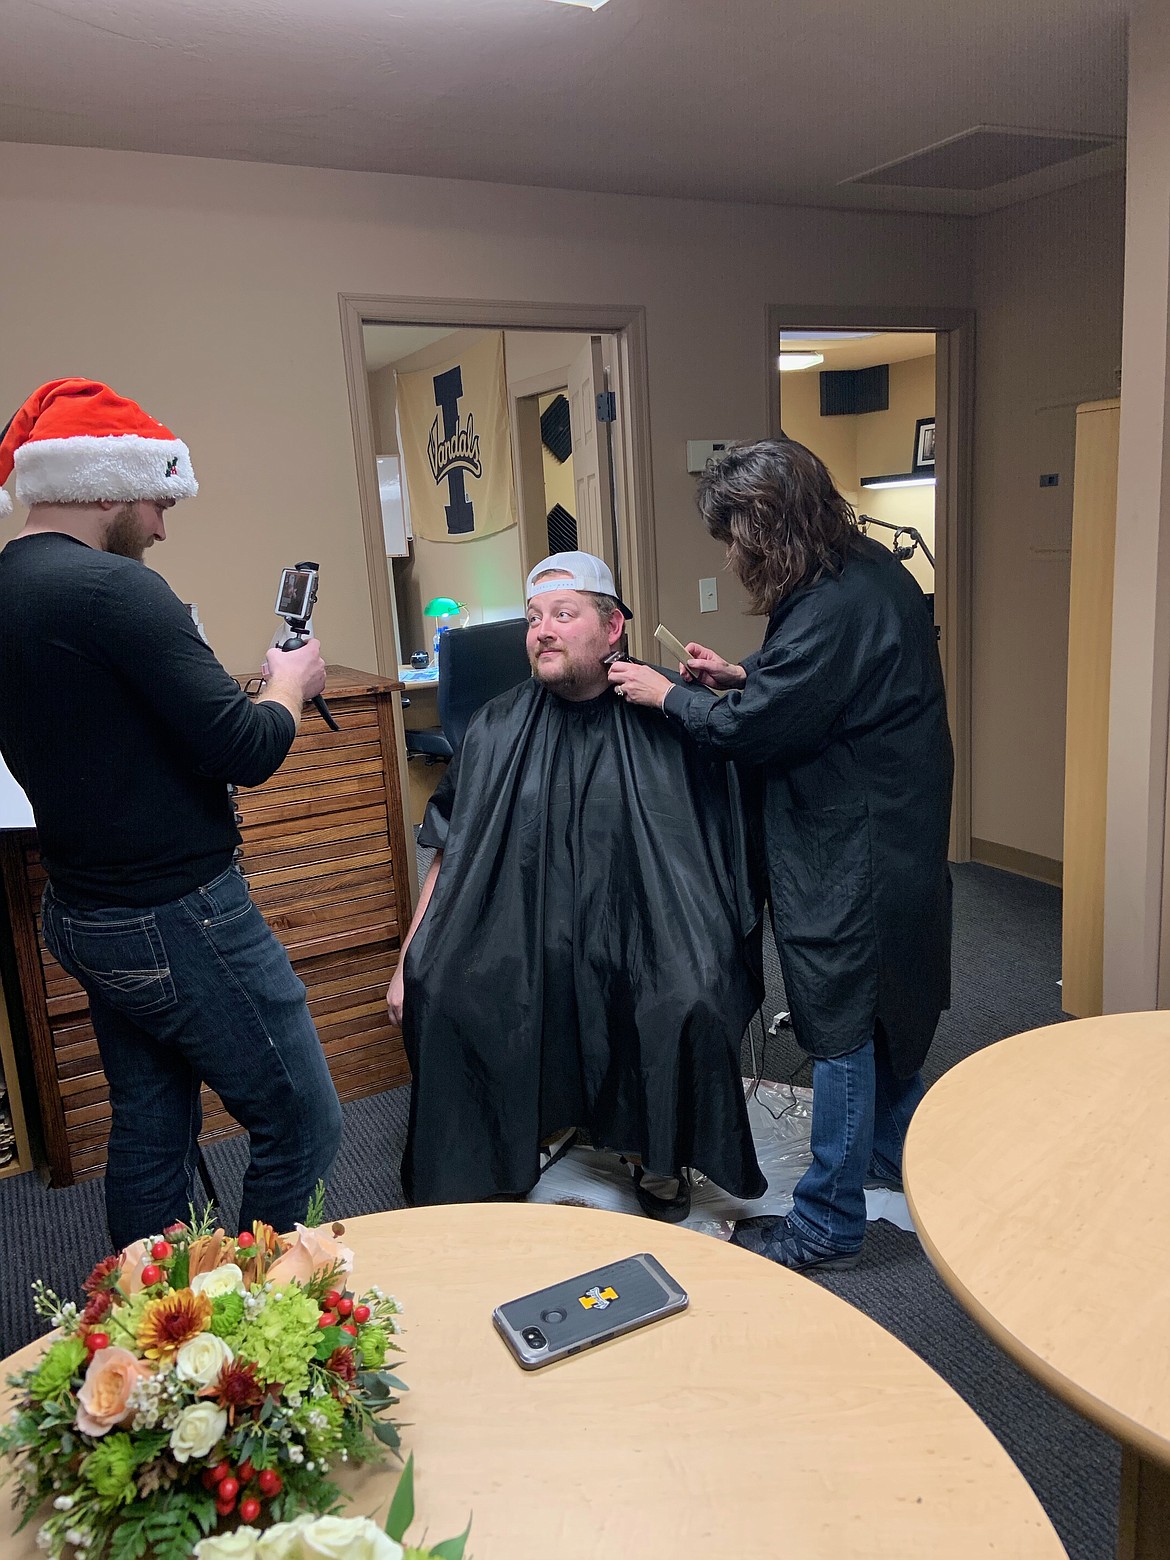 Photo by ARIANA McDONALD
News-Press staff reporter Josh McDonald had his beard shaved off on Facebook Live after resident Danny Kenyon donated $250.